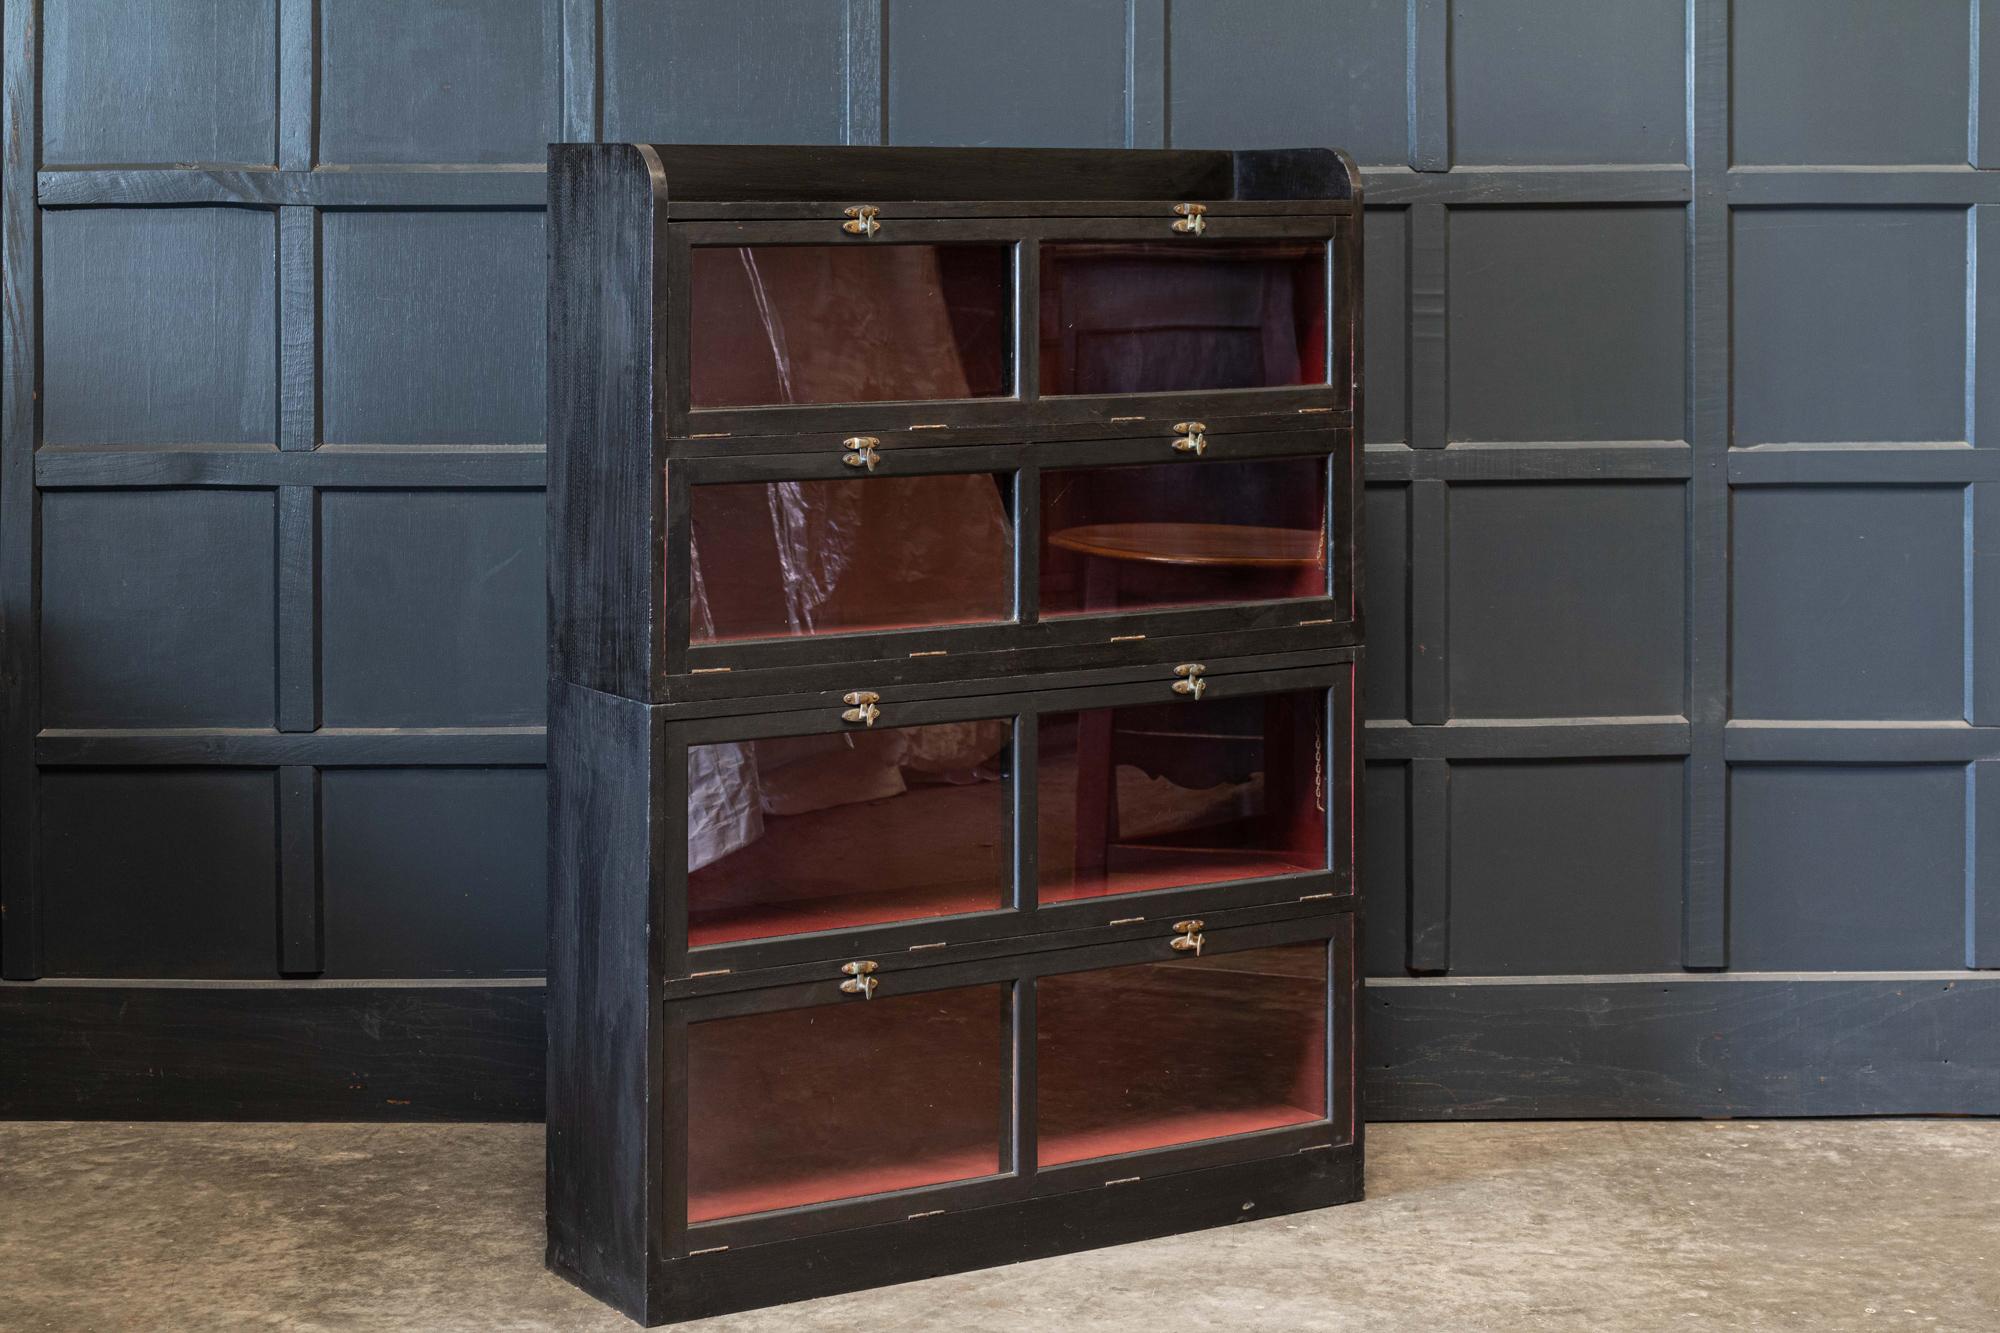 Circa 1890.

19thC English ebonised oak glazed drapers shop fitters cabinet with original hardware.

Two stackable sections.

sku 549

Measures: W 107 x D 28 x H 139cm.